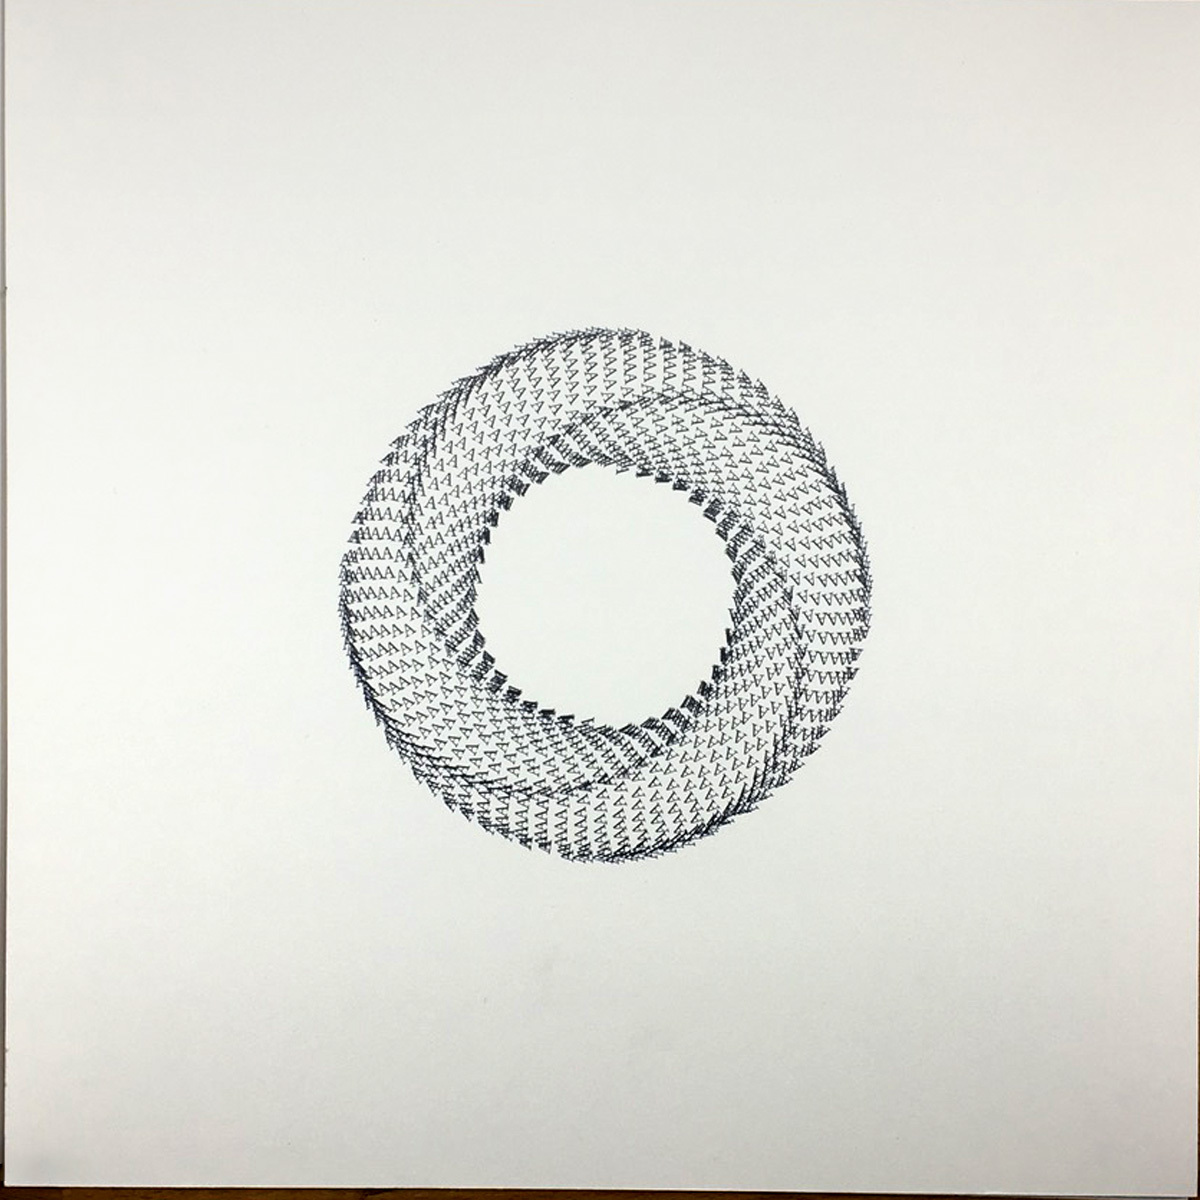 a single spiral with the letter "A" pressed in going around the spiral to give dimension.